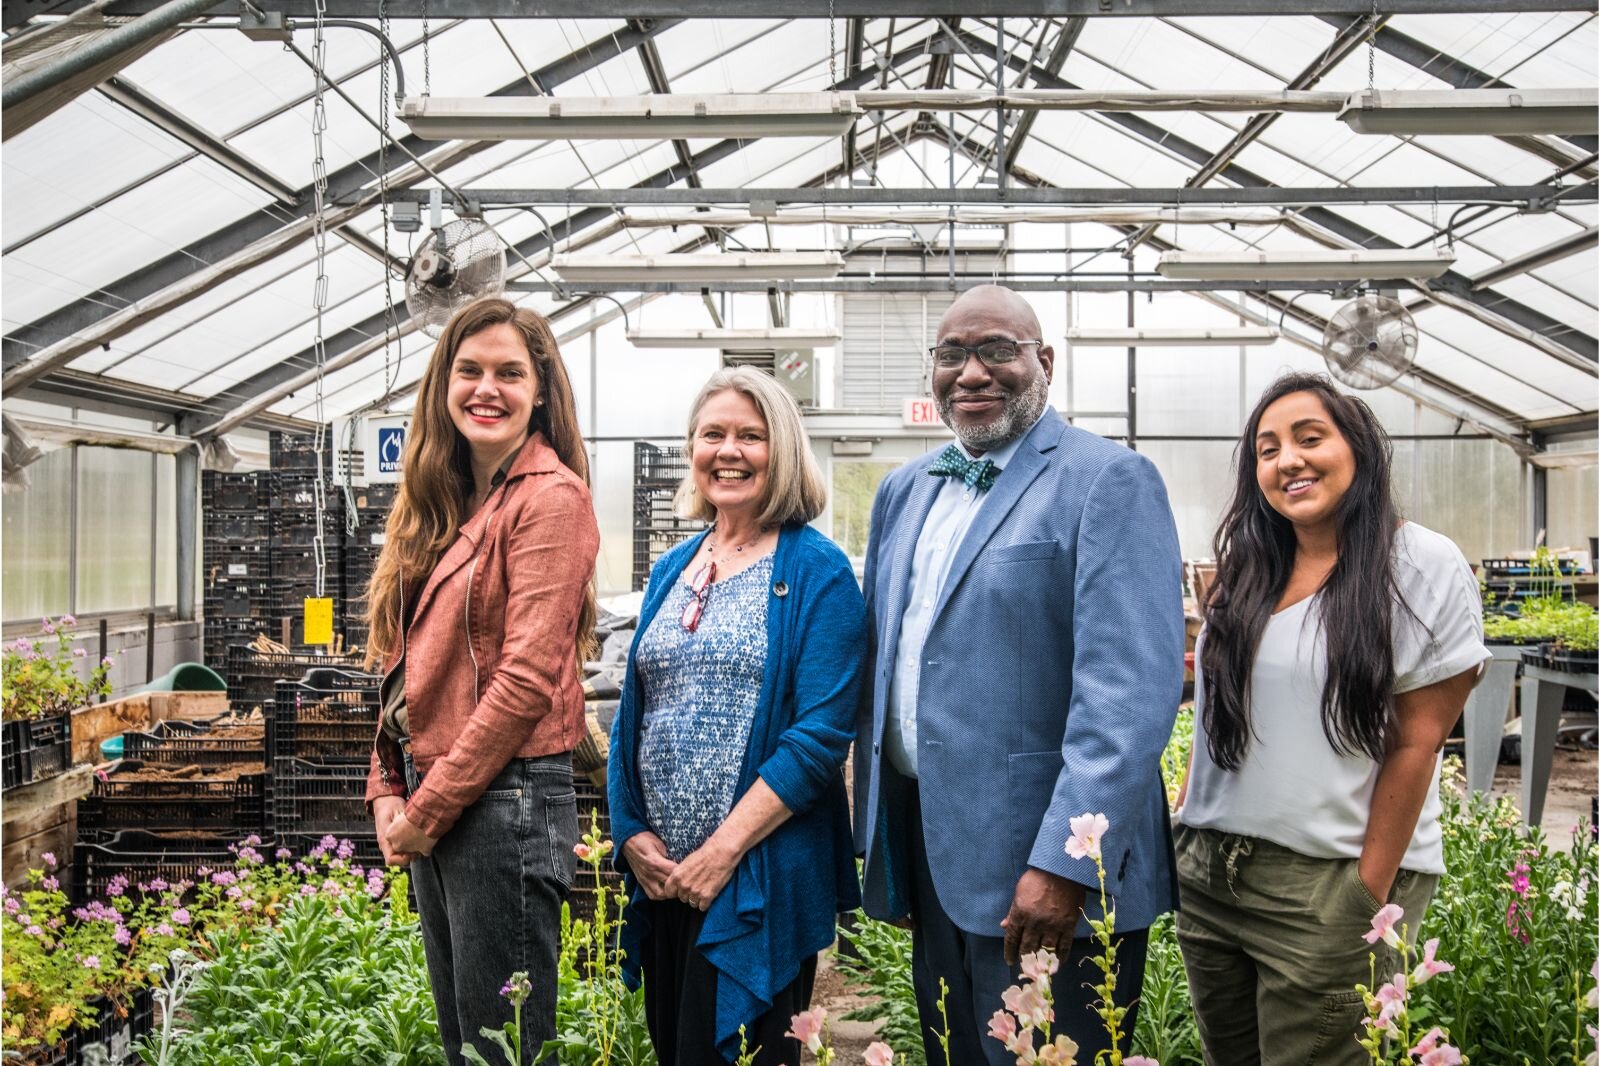 The Land Bank staff: Anna Roeder, Administrative Assistant; Theresa Coty O’Neil, Assistant Director; Sidney Ellis, Executive Director; and Reality Rojas, Project Manager.